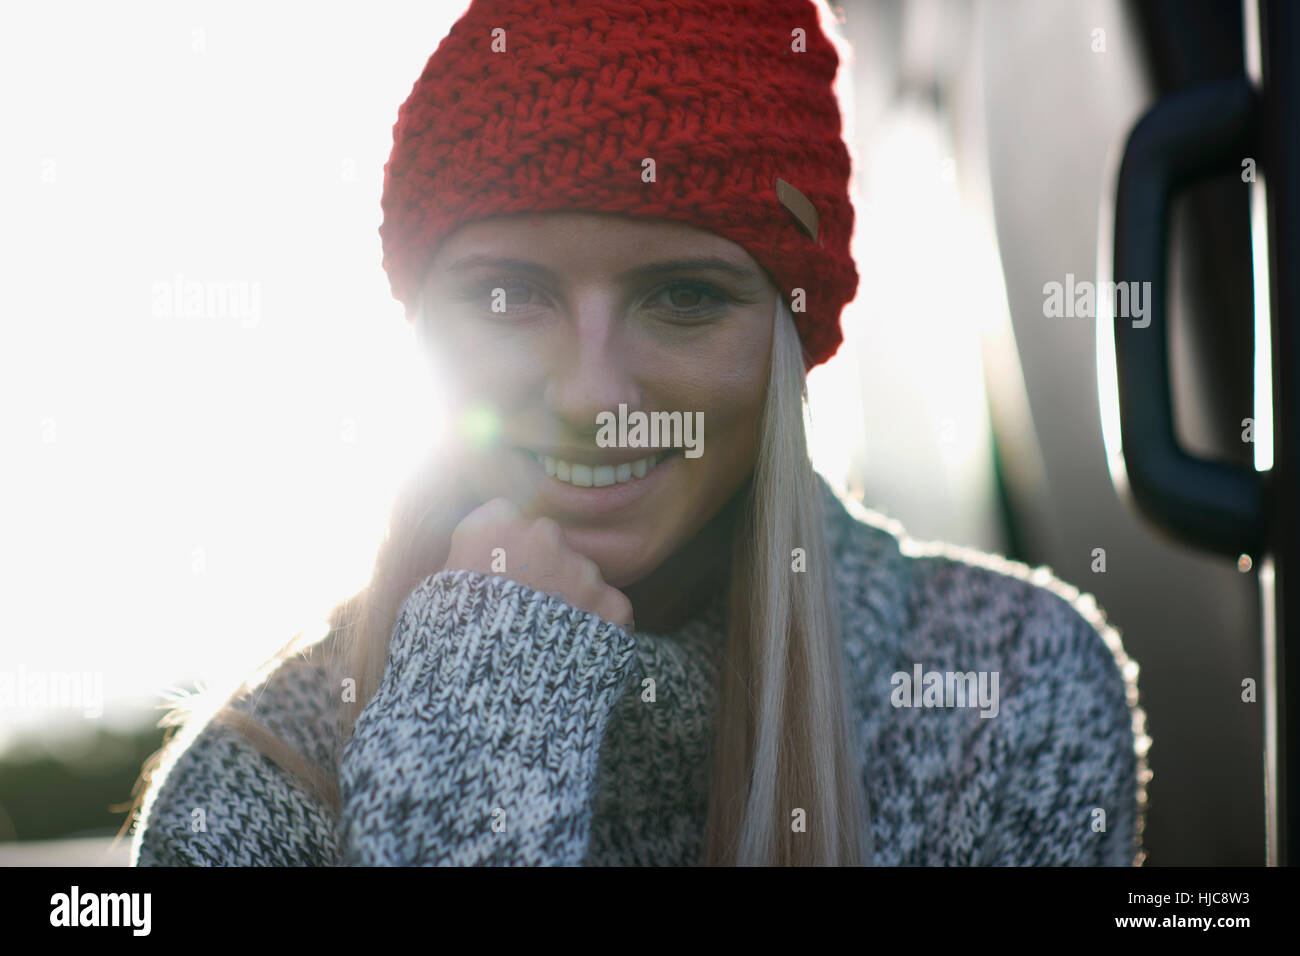 Sunlit portrait of young woman in red knit hat Stock Photo